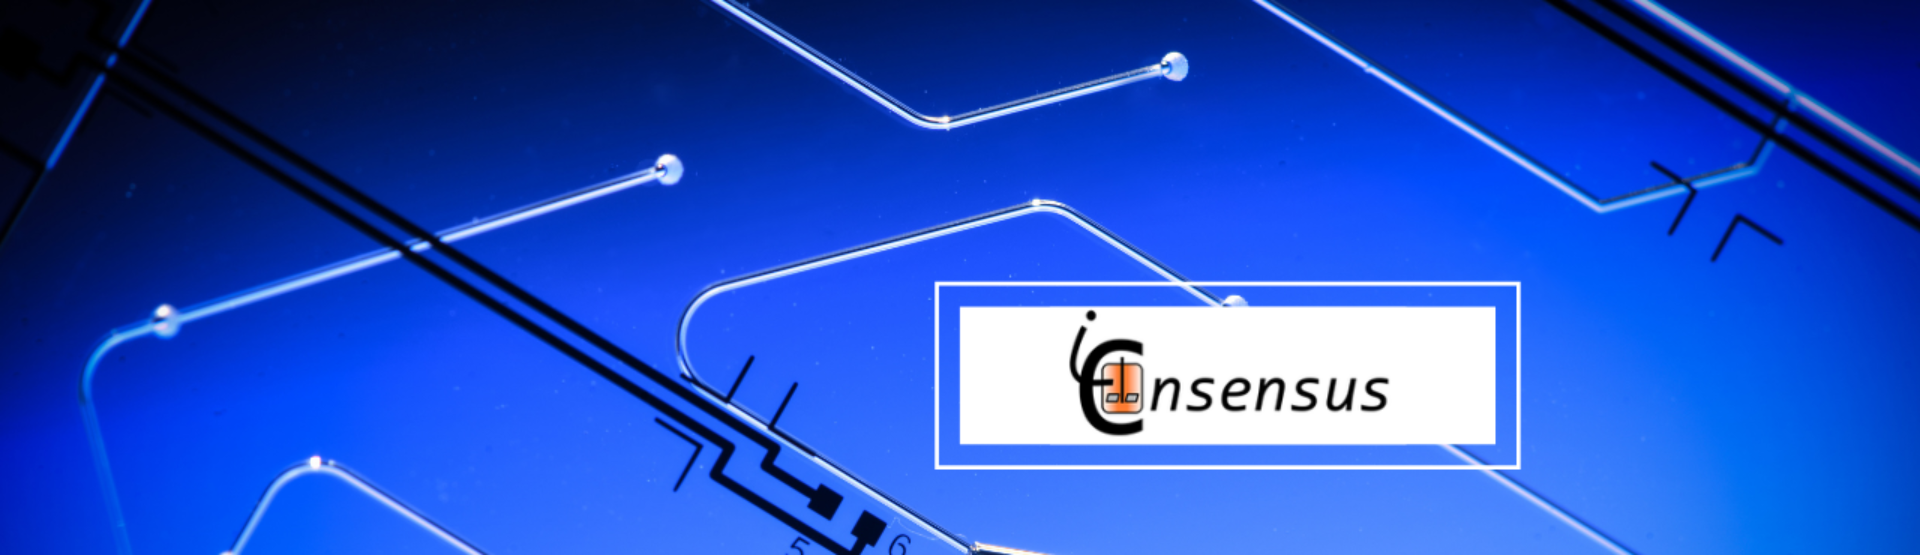 logo iconsensus research project